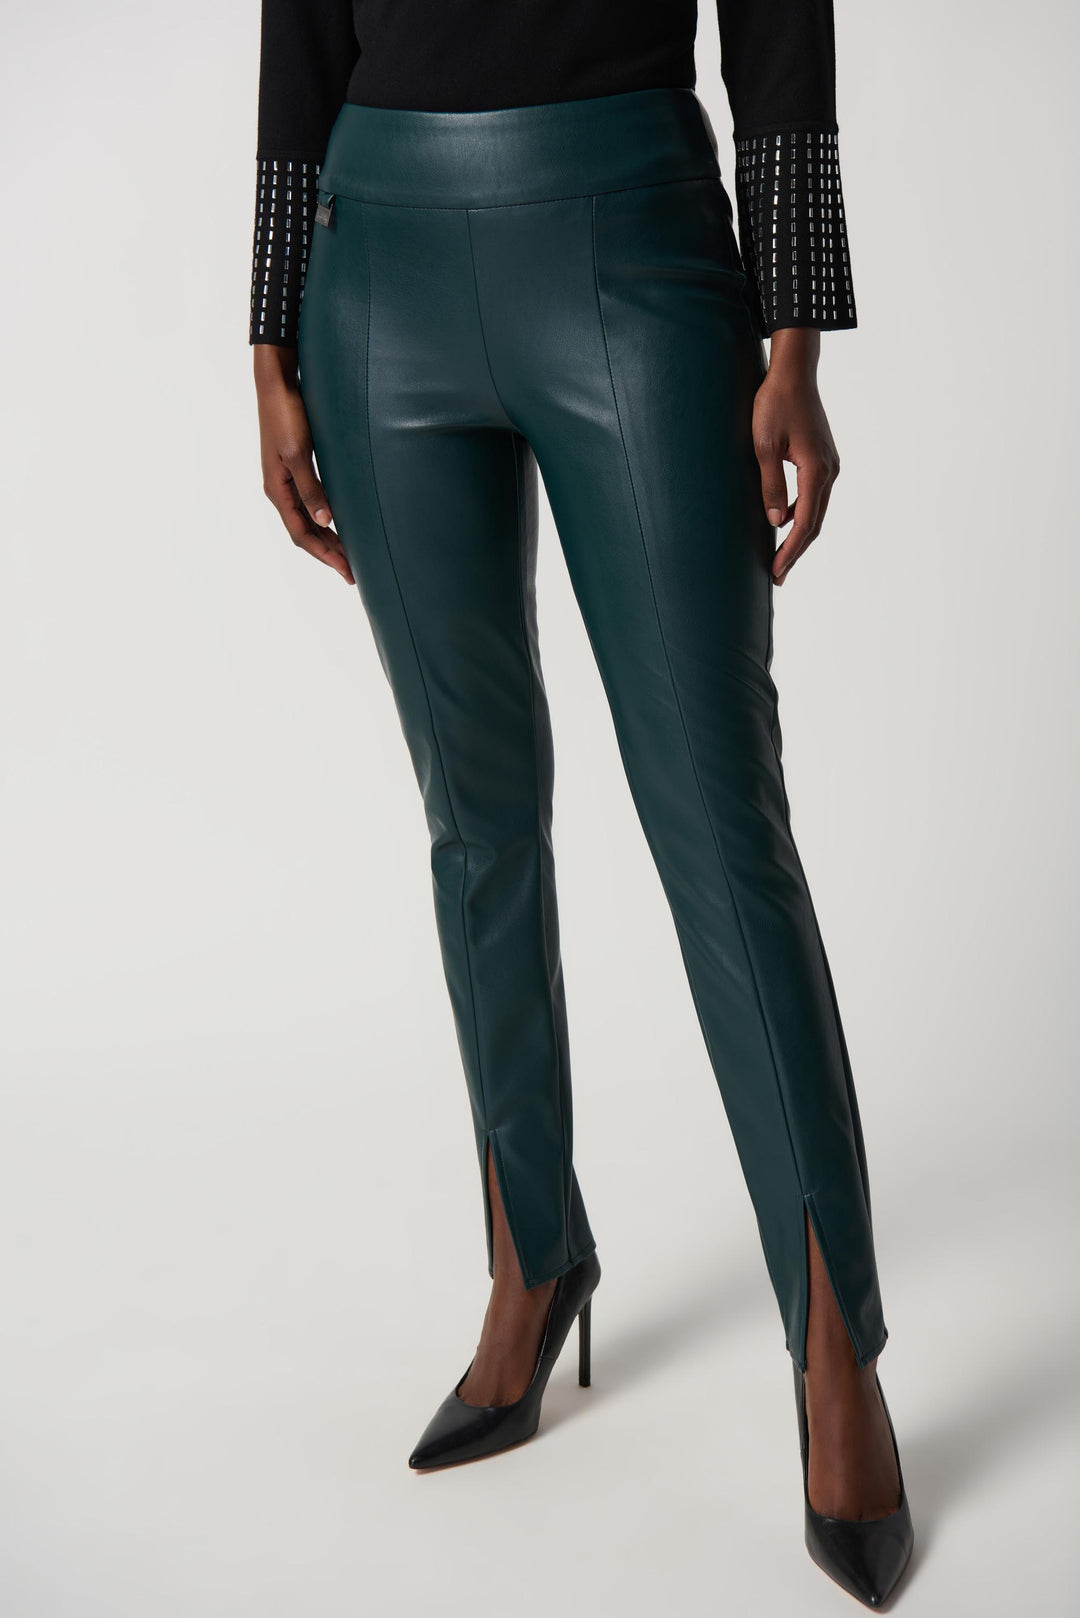 "Joseph Ribkoff Alpine Green Faux Leather Slim Fit Pull-On Pants Style 234148"